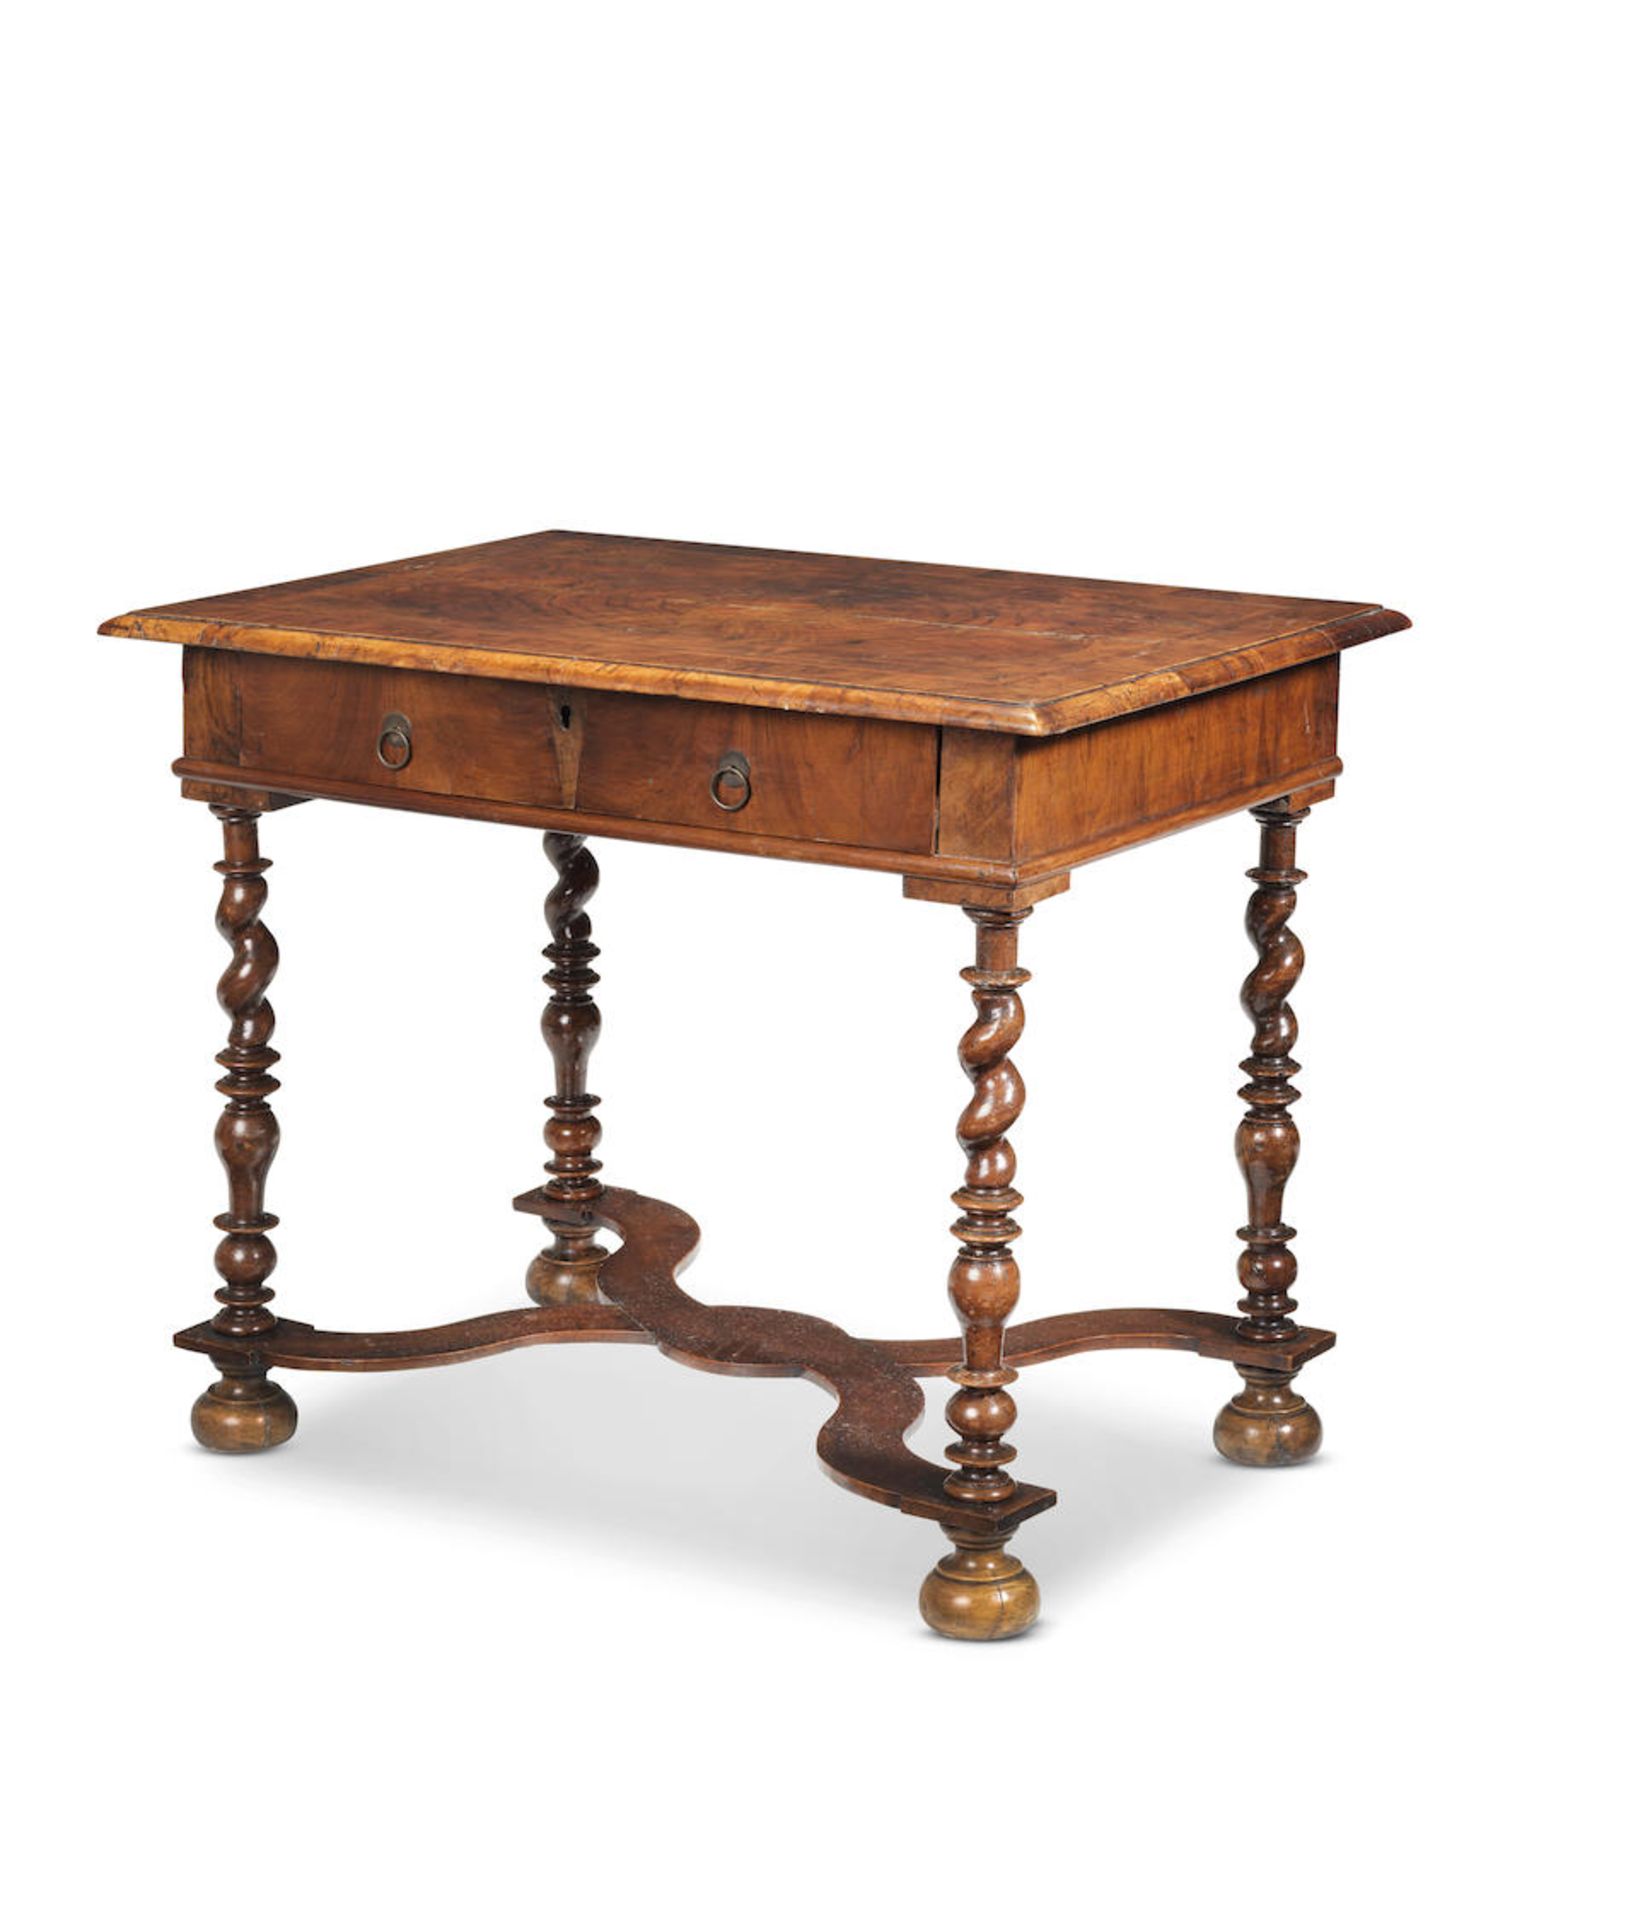 A walnut side table largely late 17th/early 18th century; the legs and stretcher probably associ...